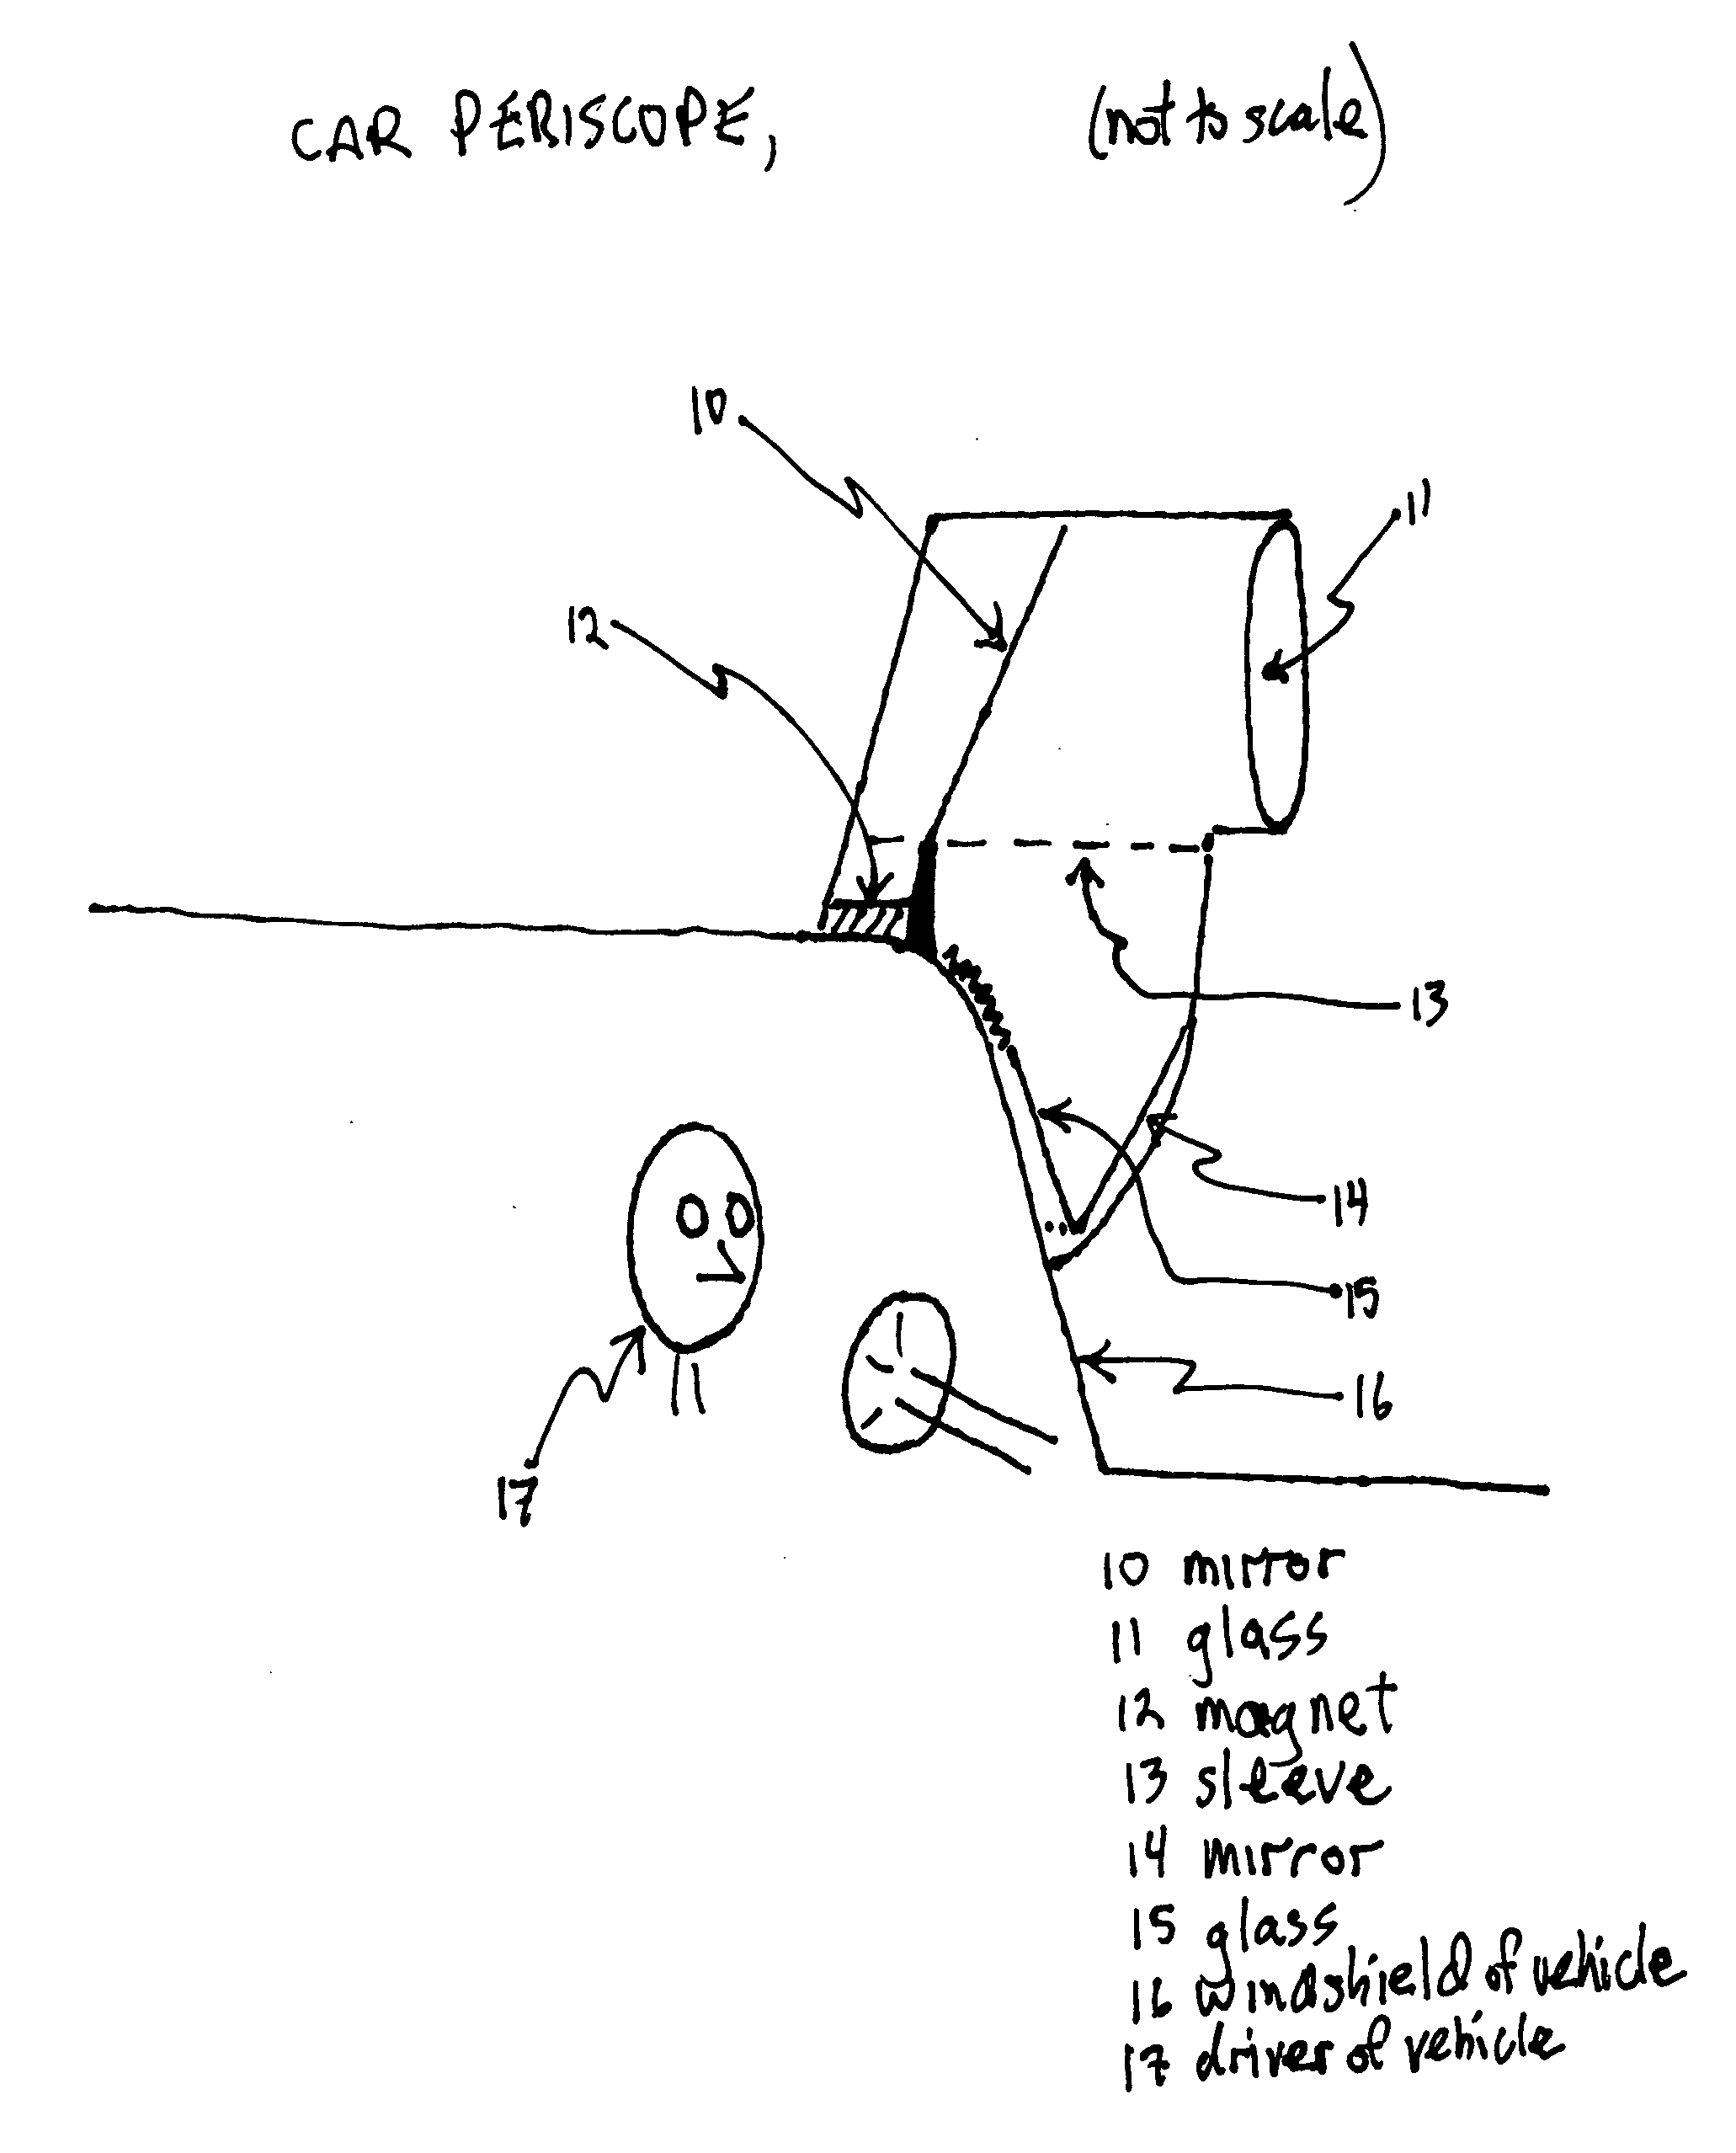 Apparatus to enable an automobile driver to see above oversized vehicles and other obstacles